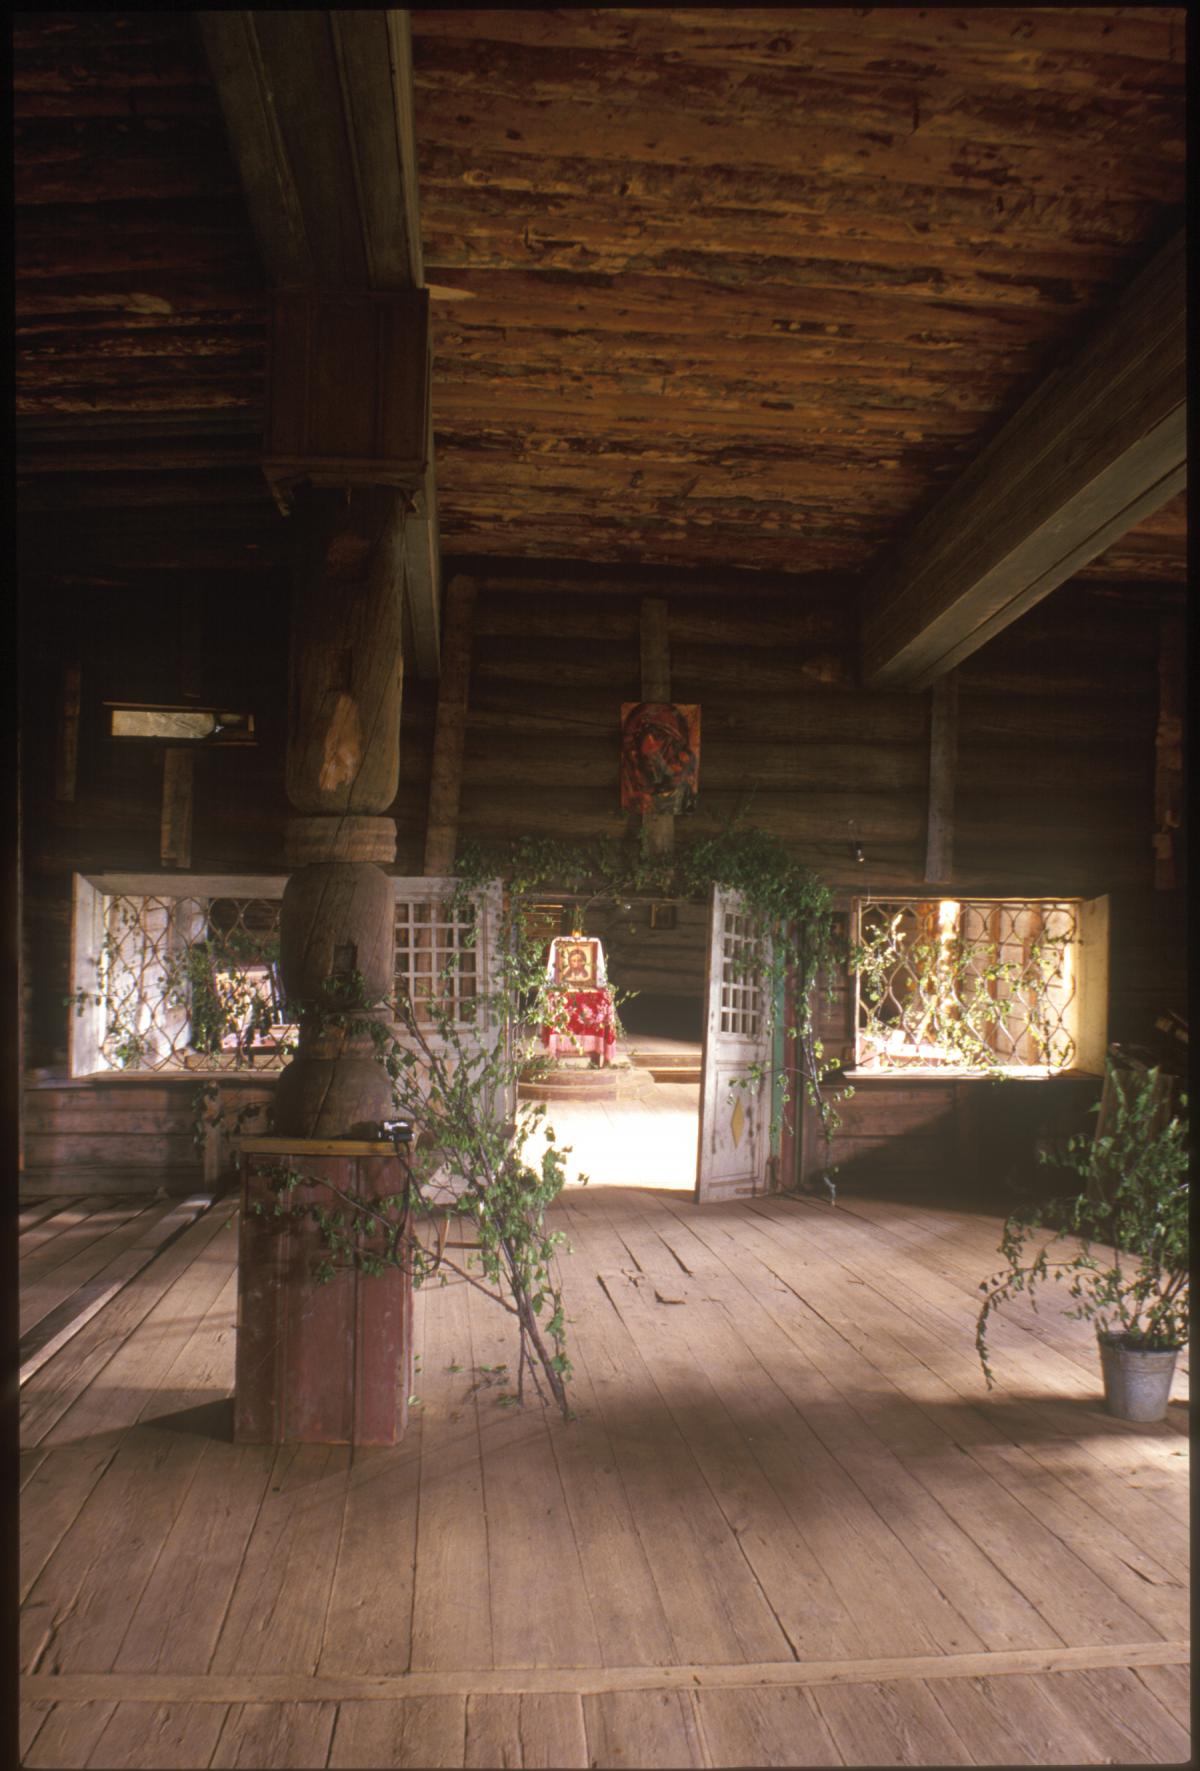 photograph of inside of church, everything made of wood